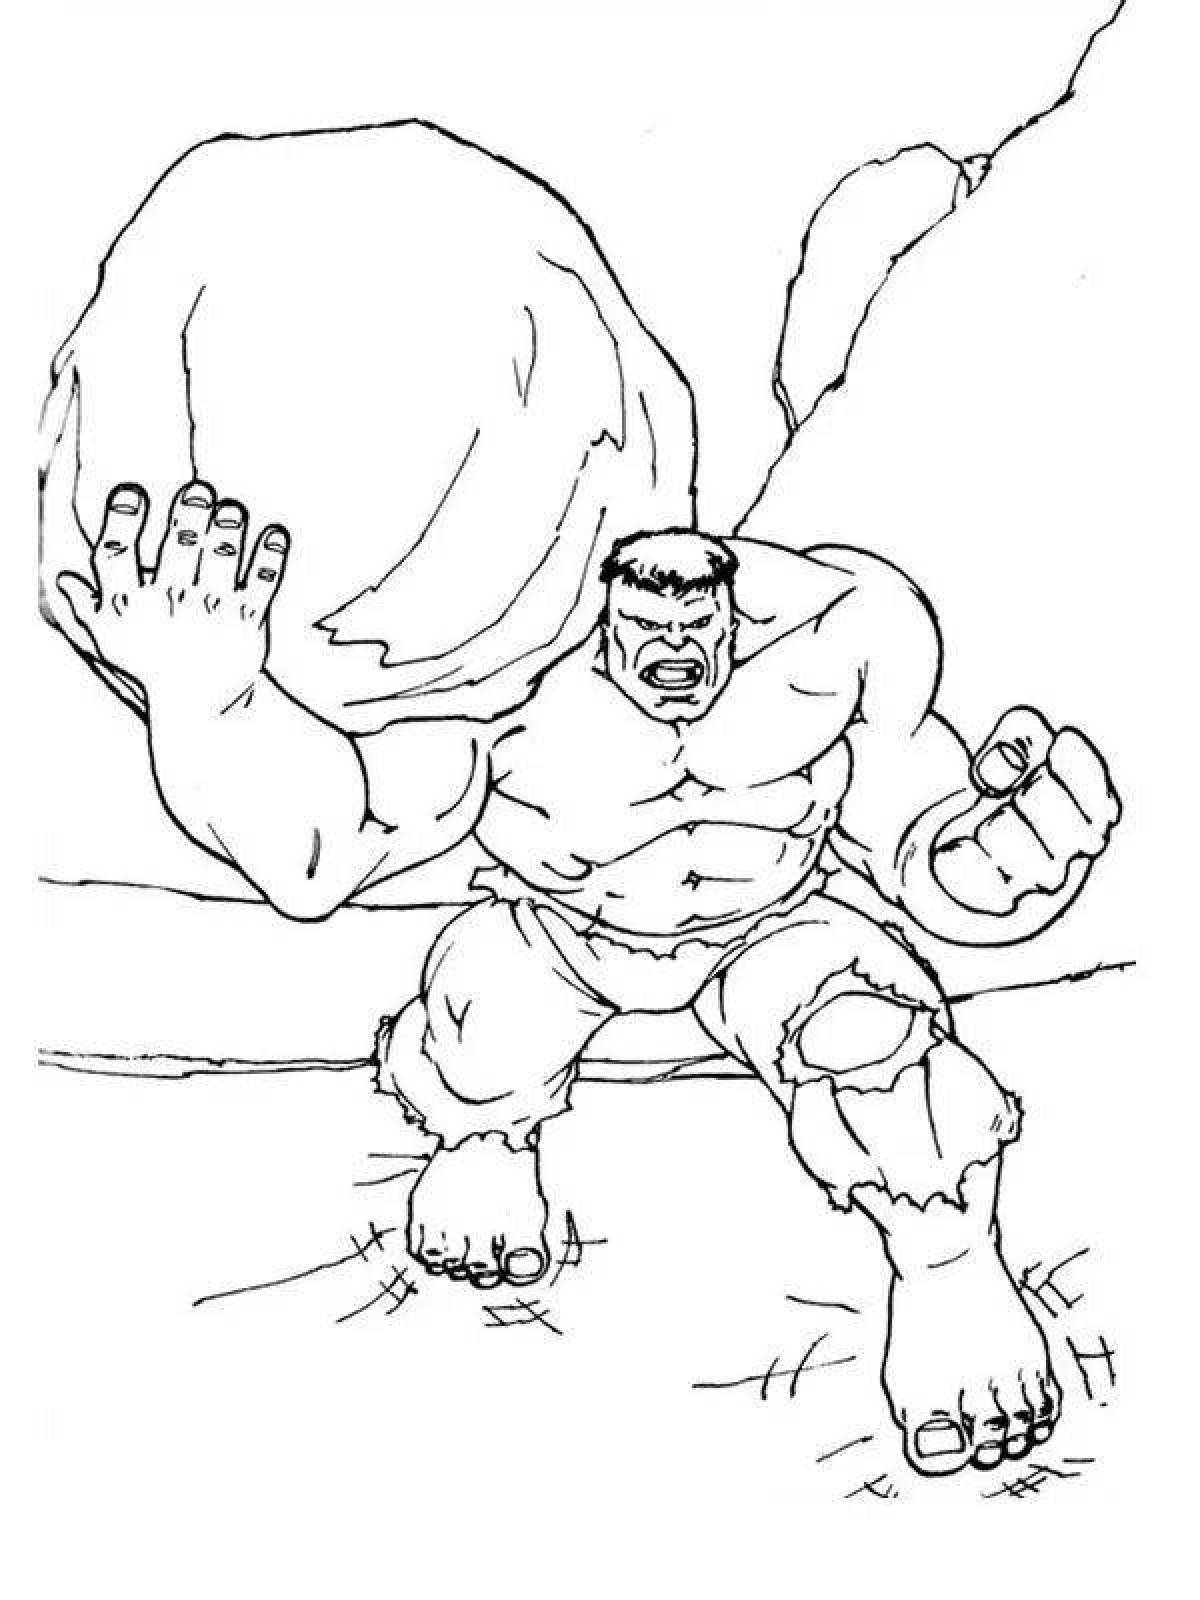 Wonderful Hulk coloring book for children 6-7 years old